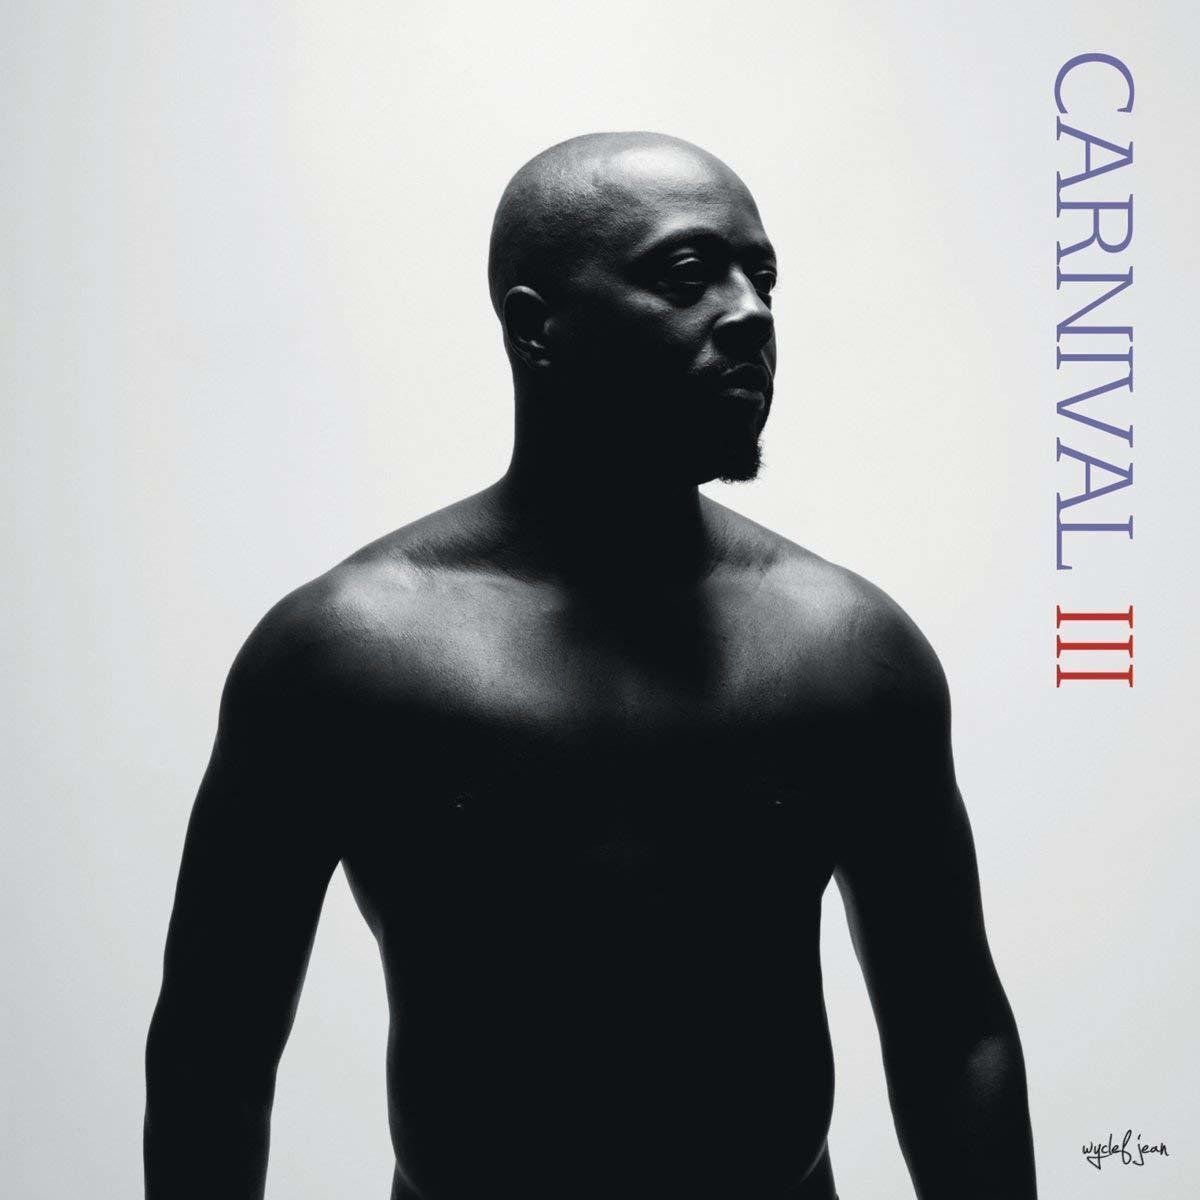 LP plošča Wyclef Jean Carnival III: The Fall and Rise of a Refugee (LP)